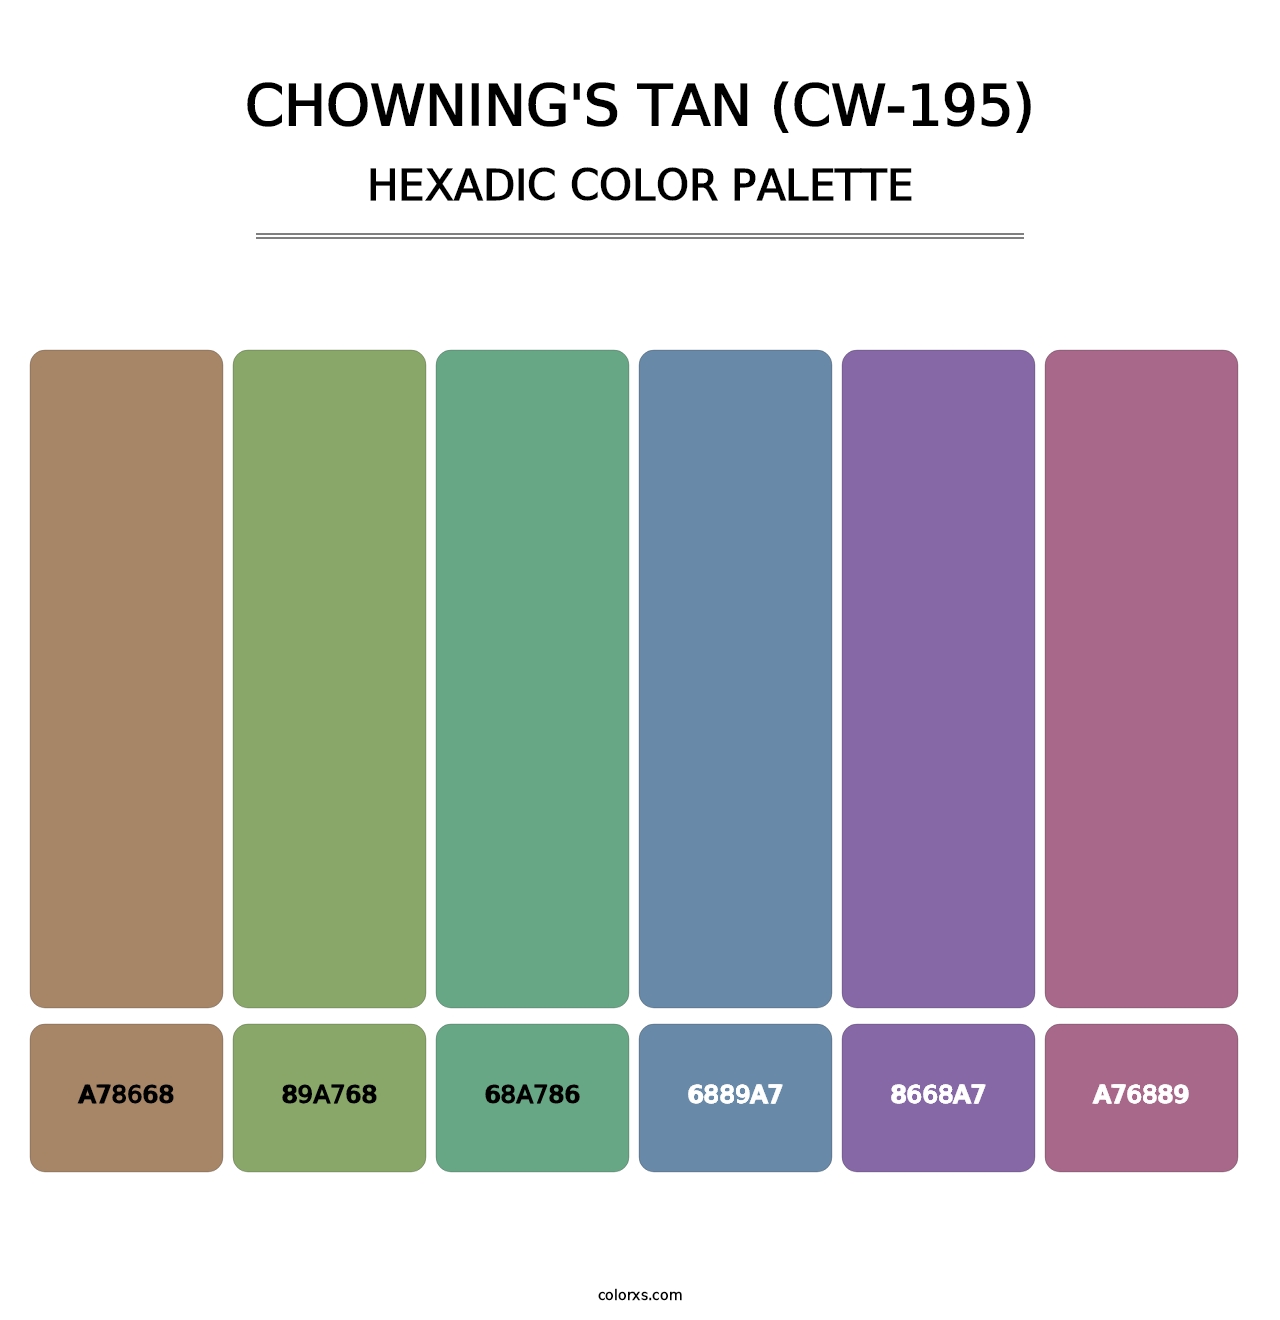 Chowning's Tan (CW-195) - Hexadic Color Palette